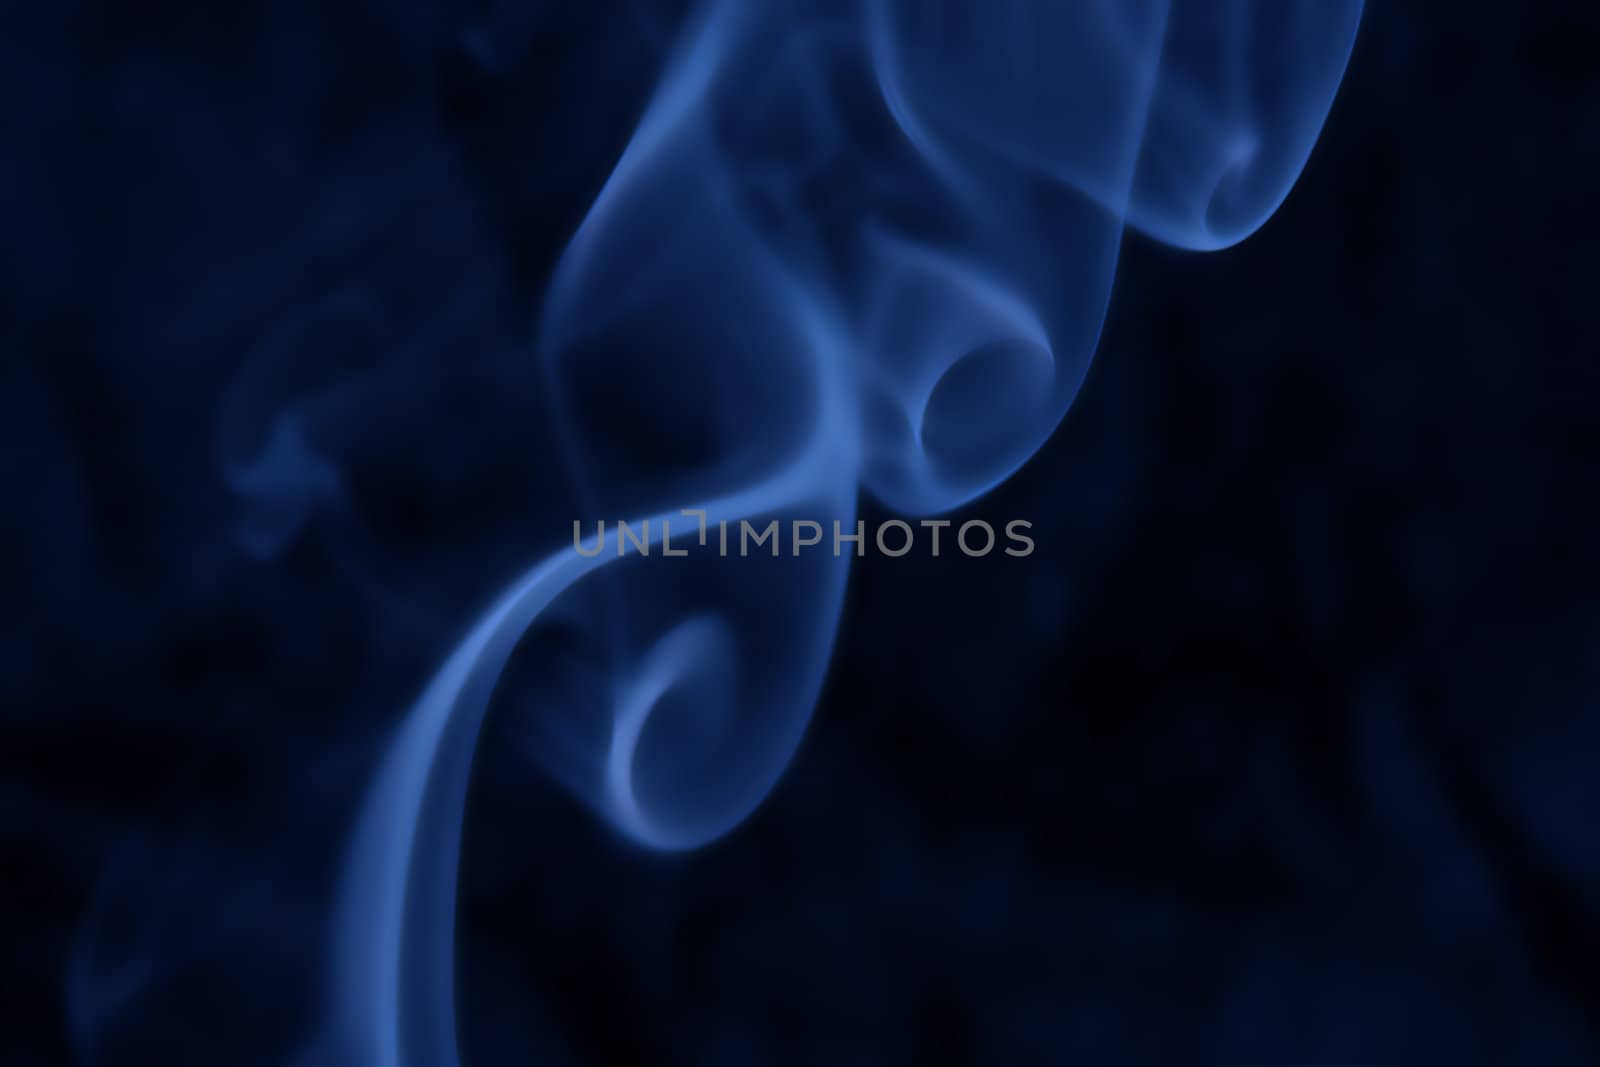 Abstract background of swirling smoke